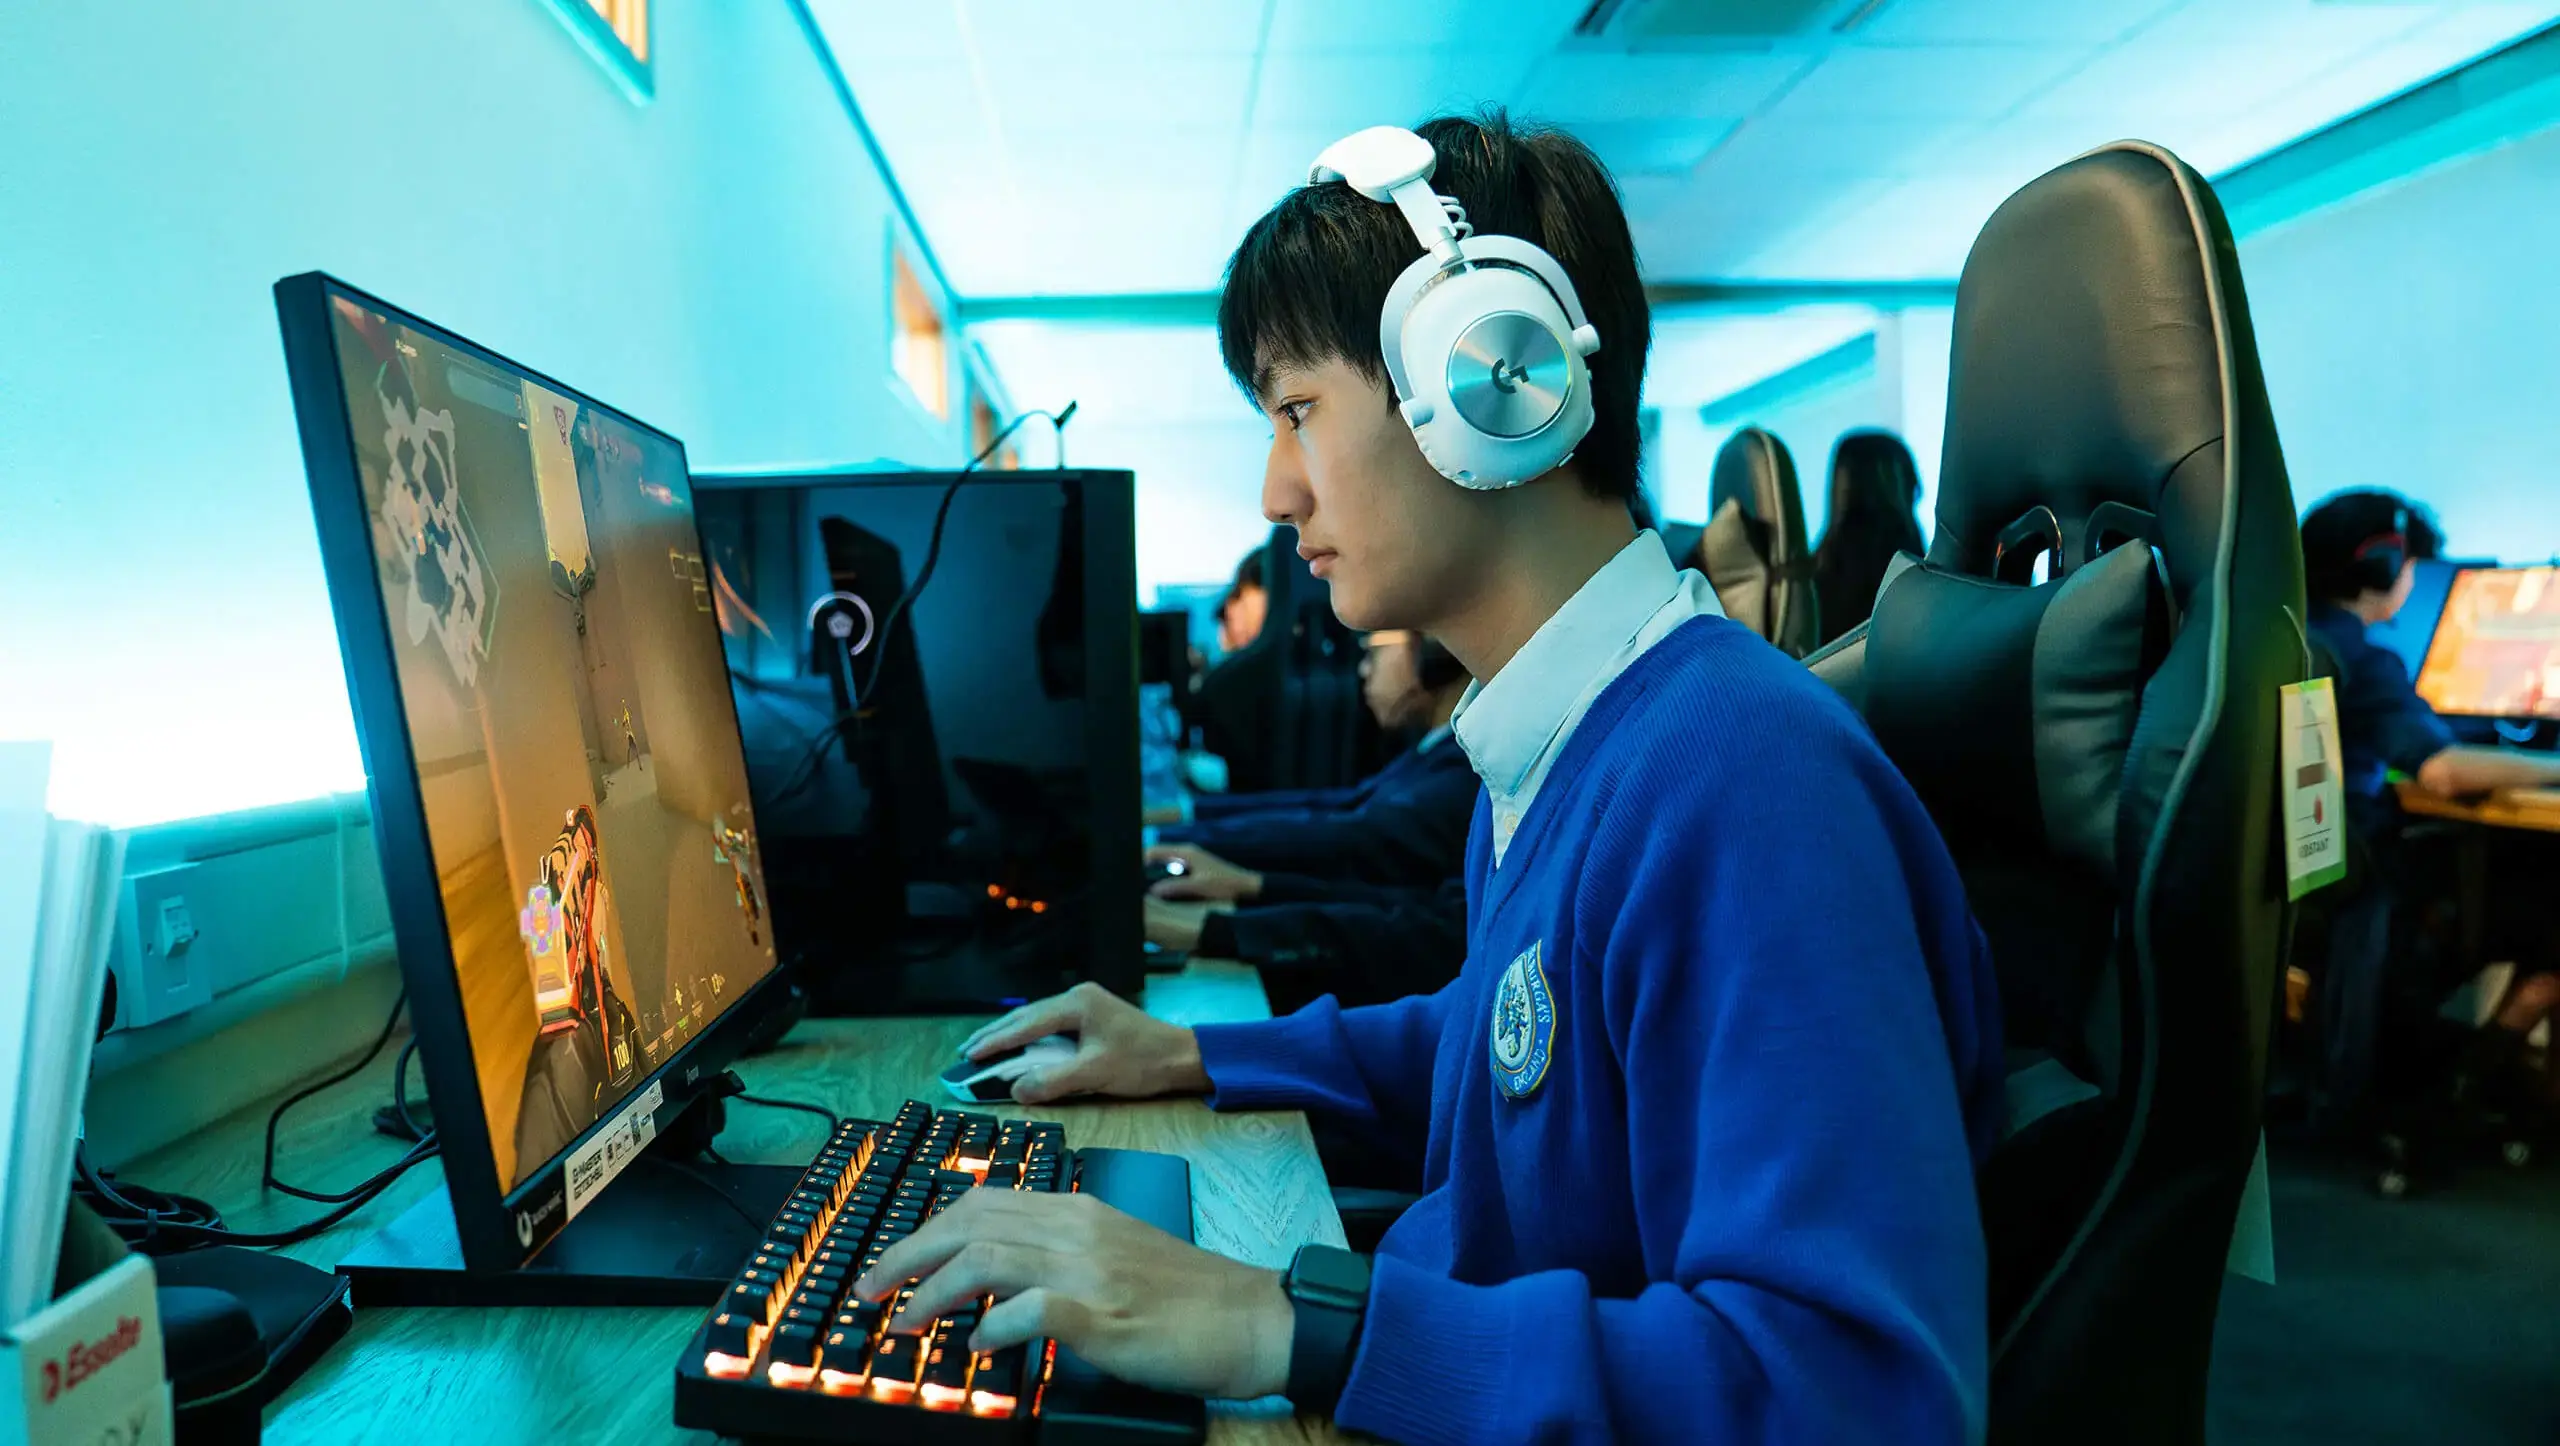 Senior school student playing a video game